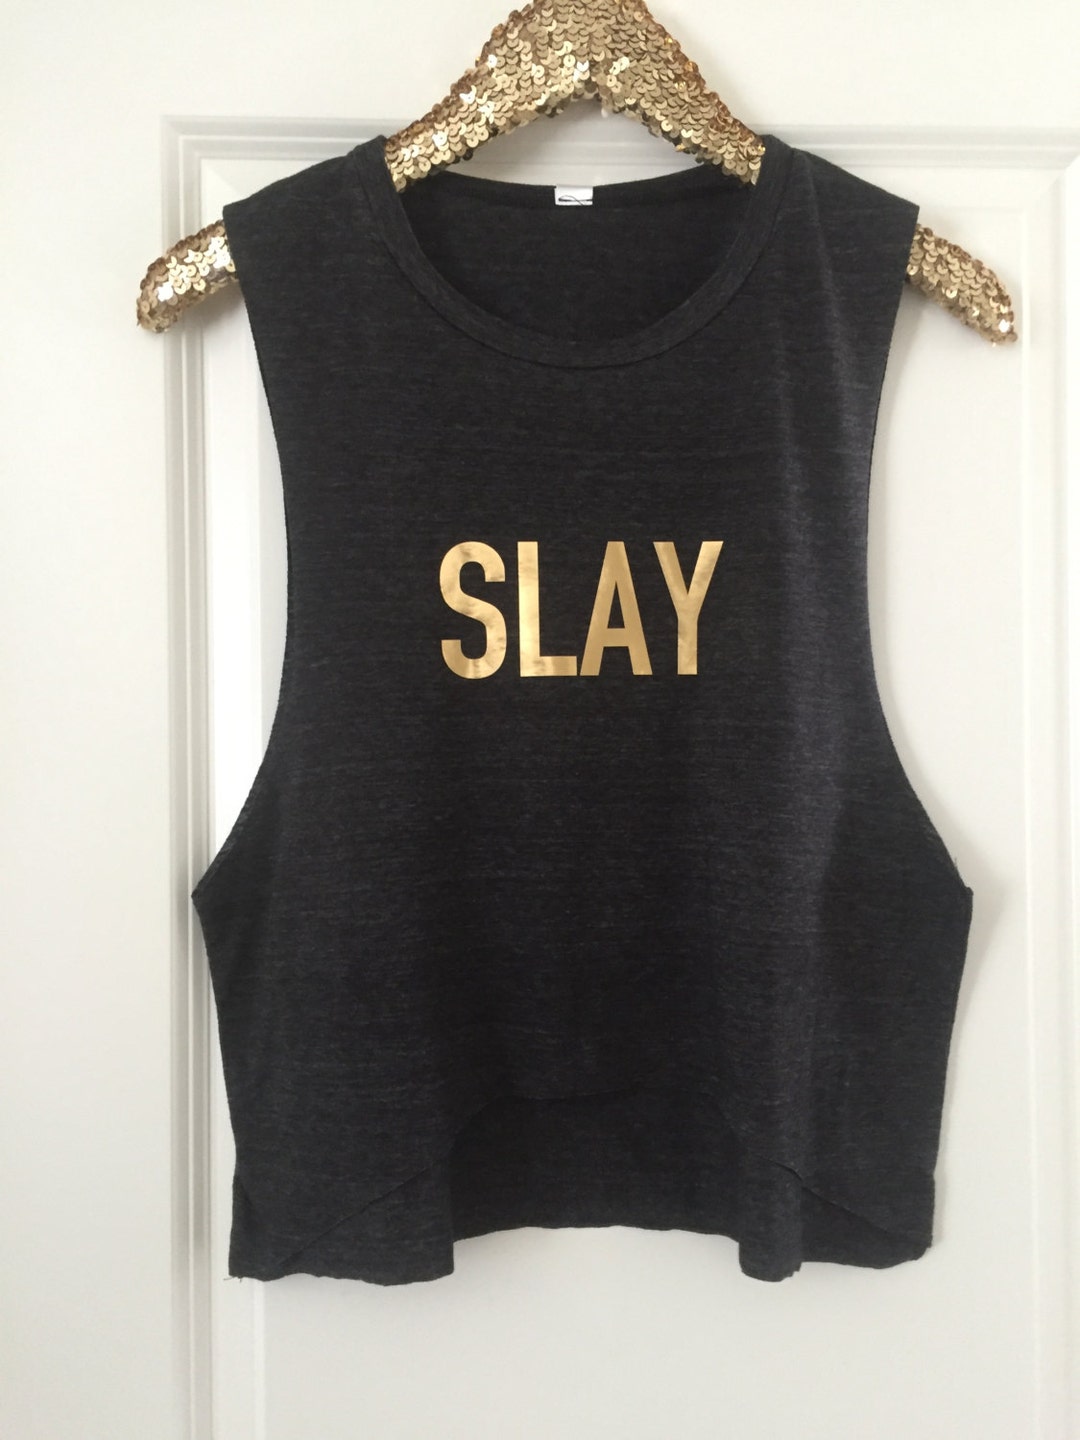 SLAY Cropped Front Muscle Tank Top Gold Foil Gift for Her - Etsy